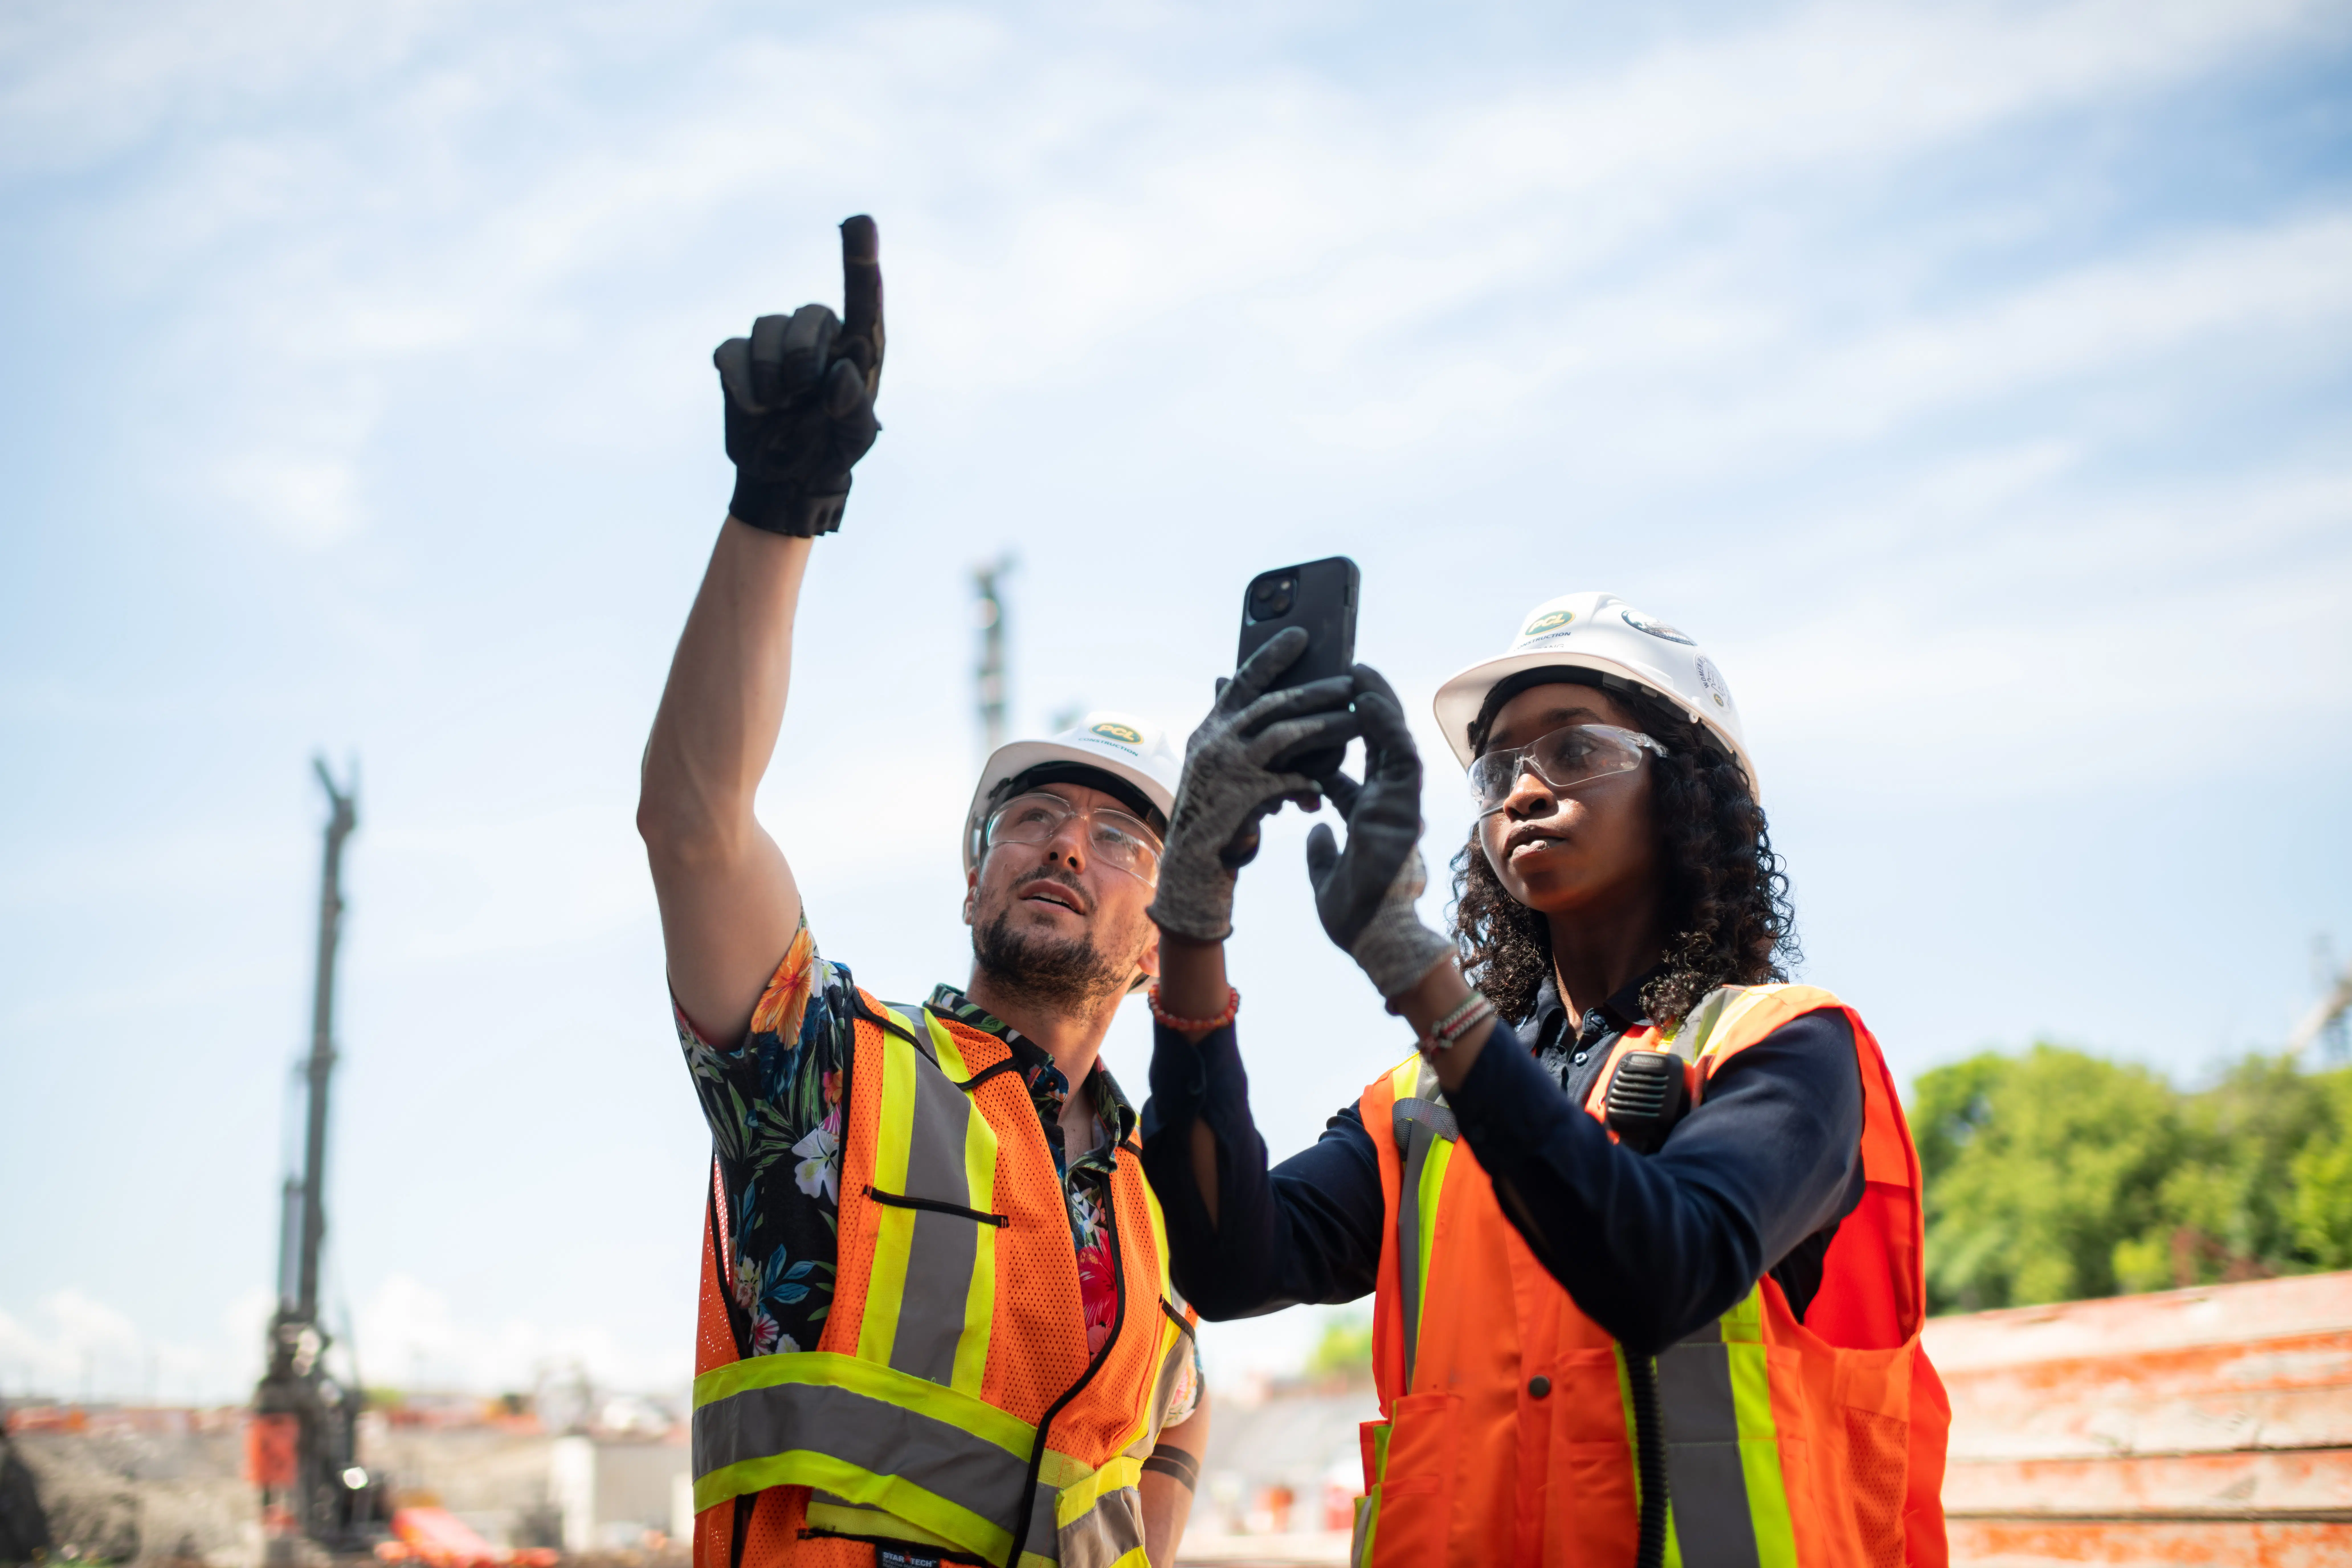 A female construction worker takes a picture while a male worker point s in the air.